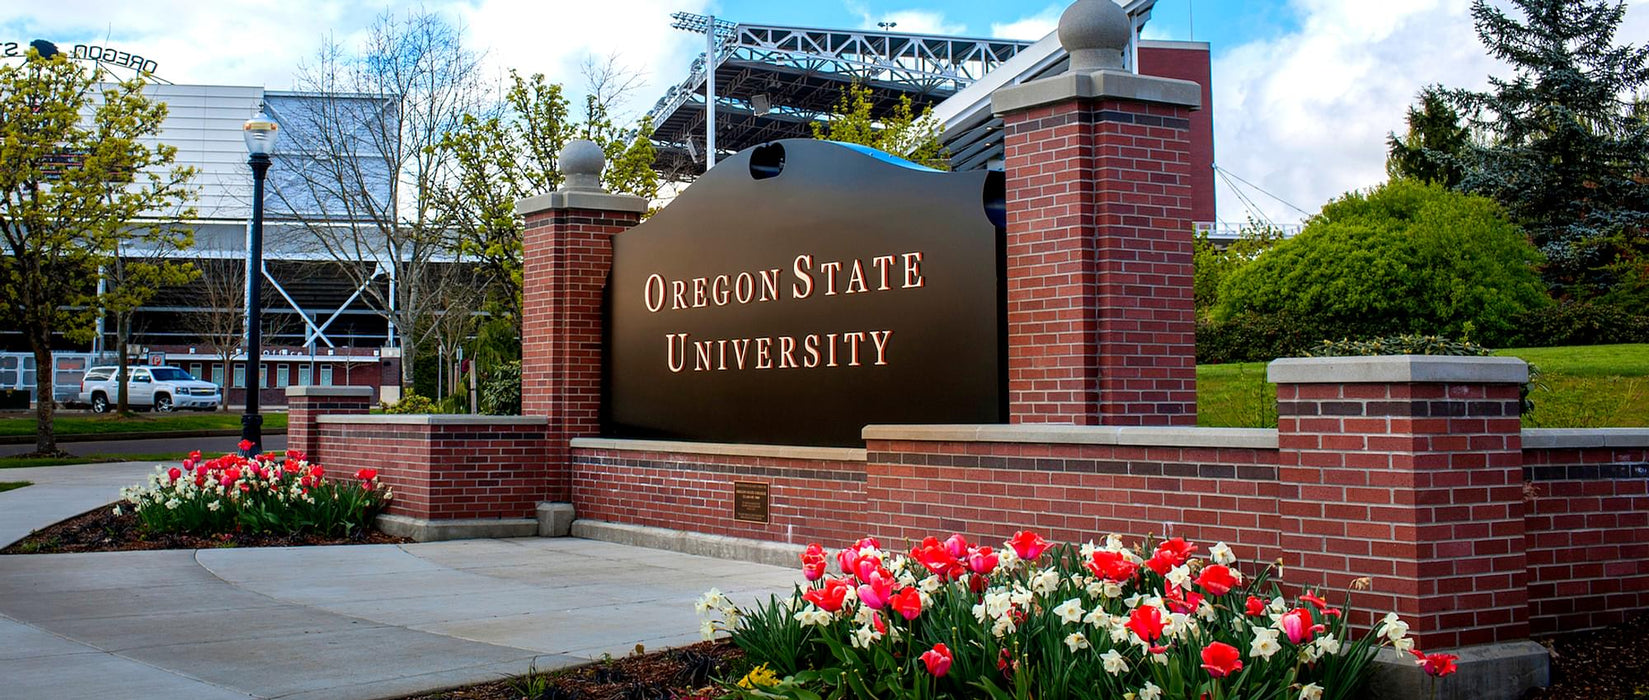 Bachelor of Science - Bioengineering at Oregon State University - Corvallis: Tuition: $32,790.00 USD/year (Scholarship Available)